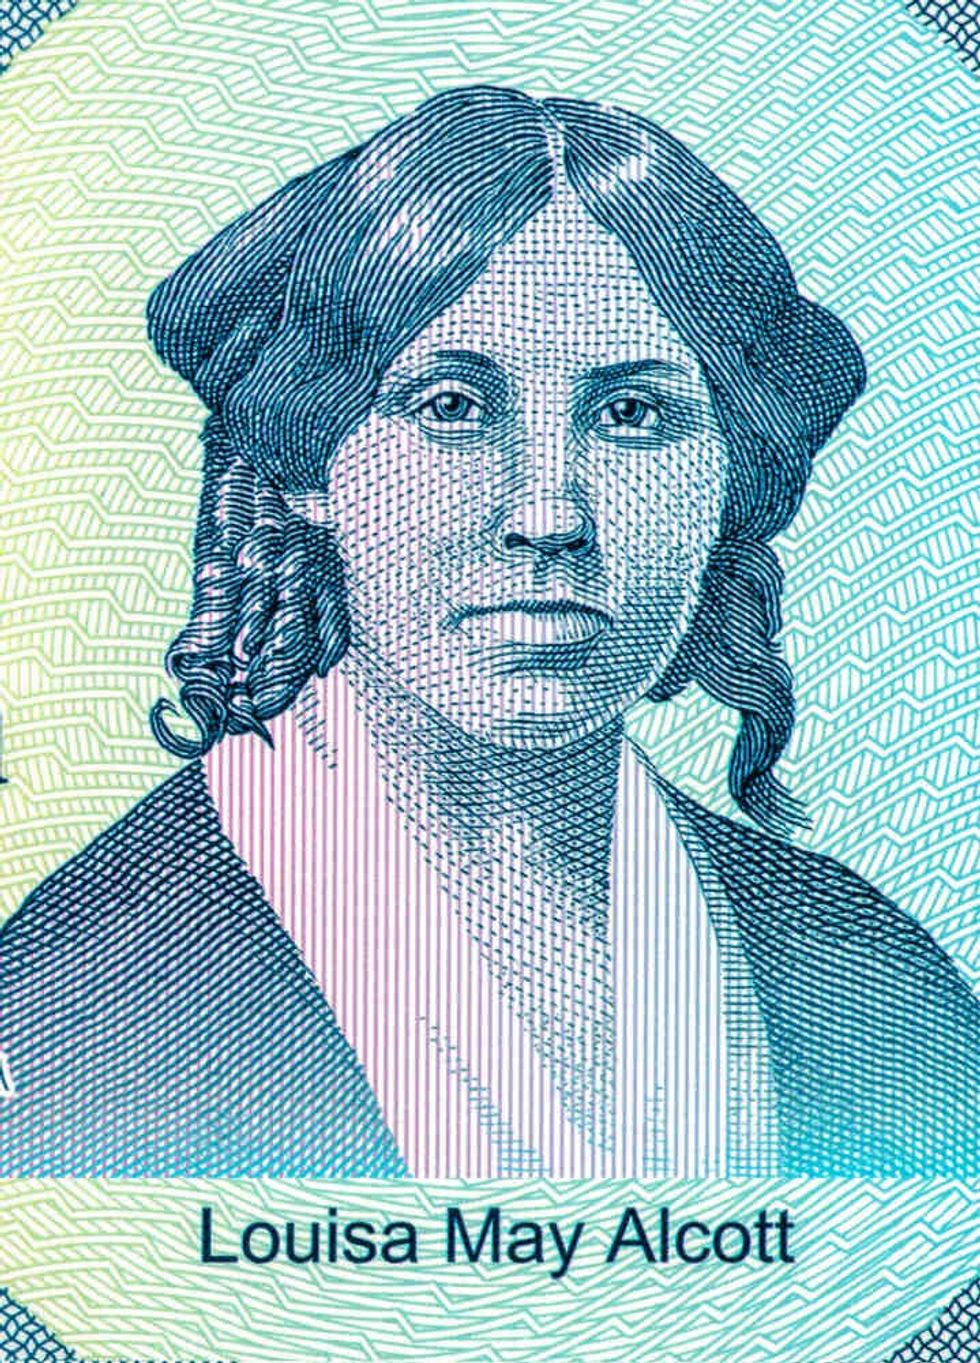 Louisa May Alcott on 50 Dollars Pennsylvania 2nd state, Dollars Polymer Banknote, Fancy polymer money Set of states.